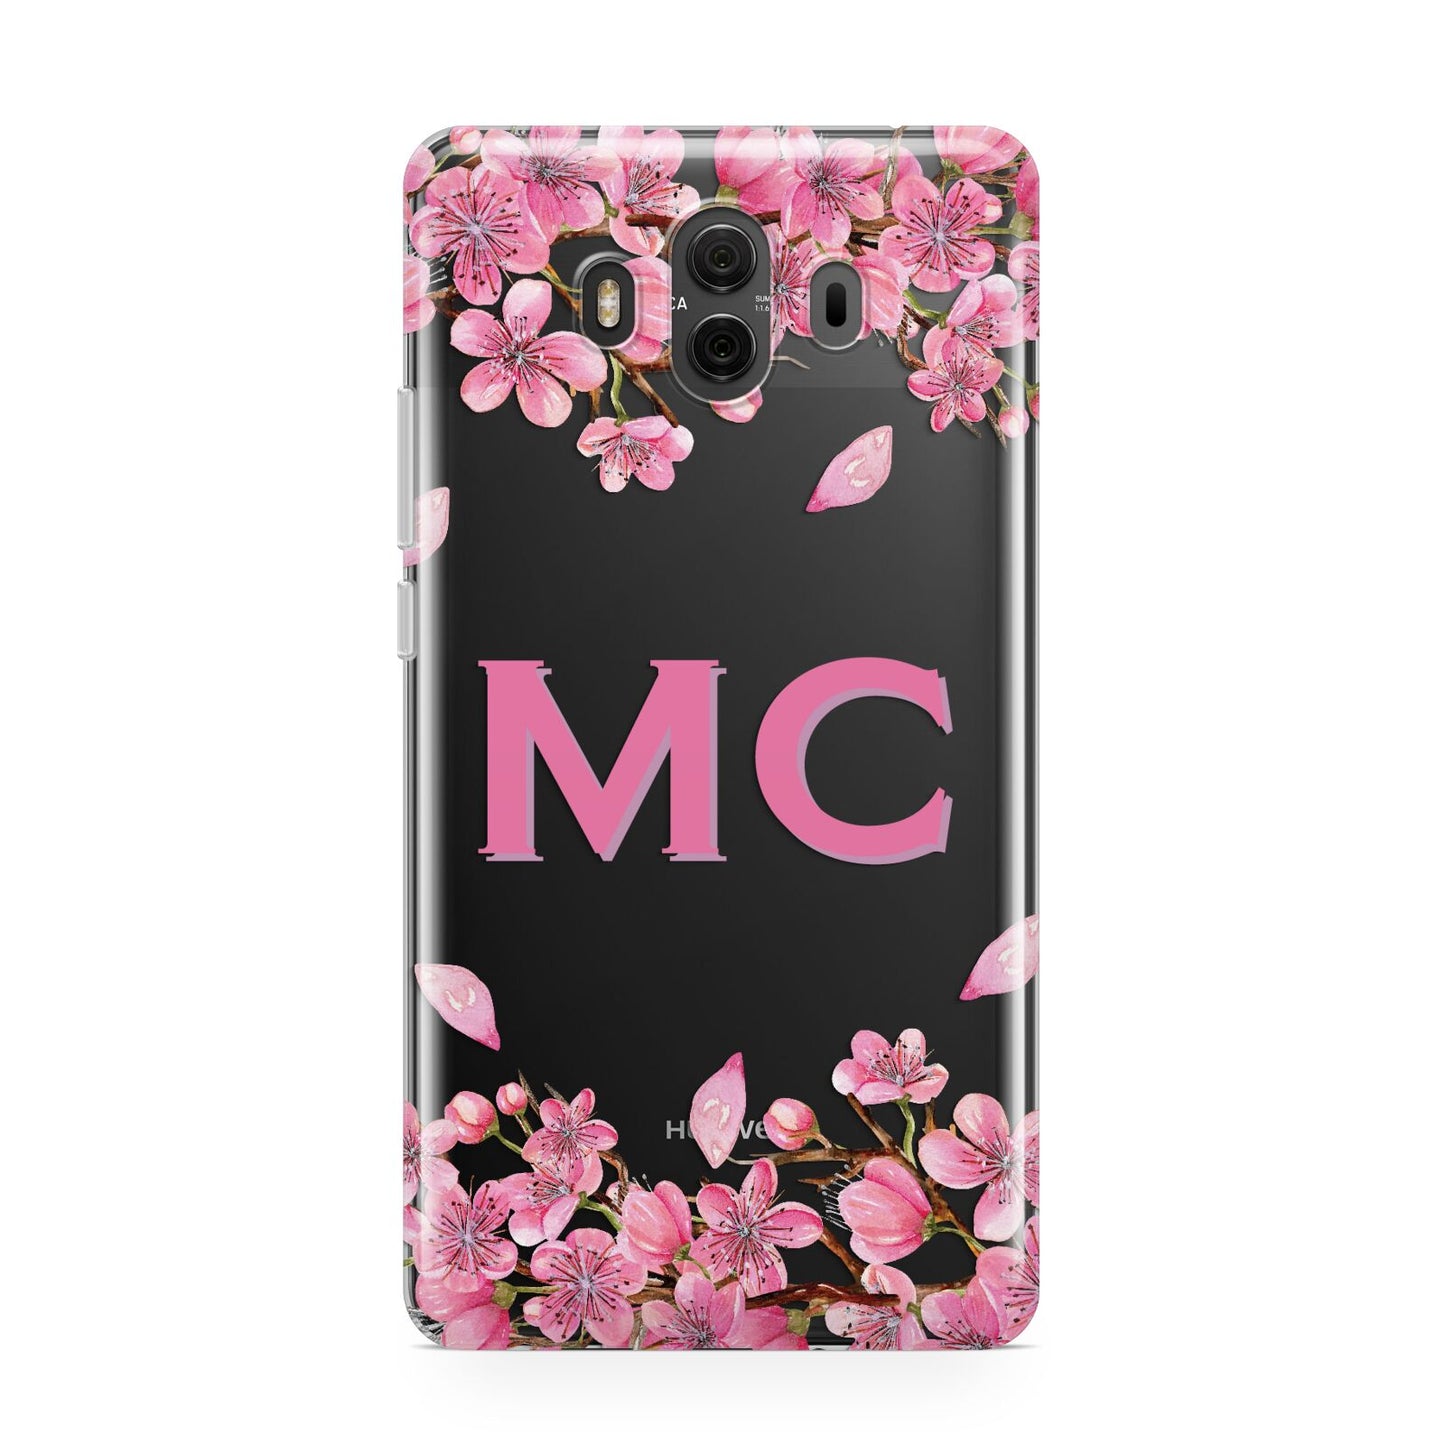 Personalised Vibrant Cherry Blossom Pink Huawei Mate 10 Protective Phone Case